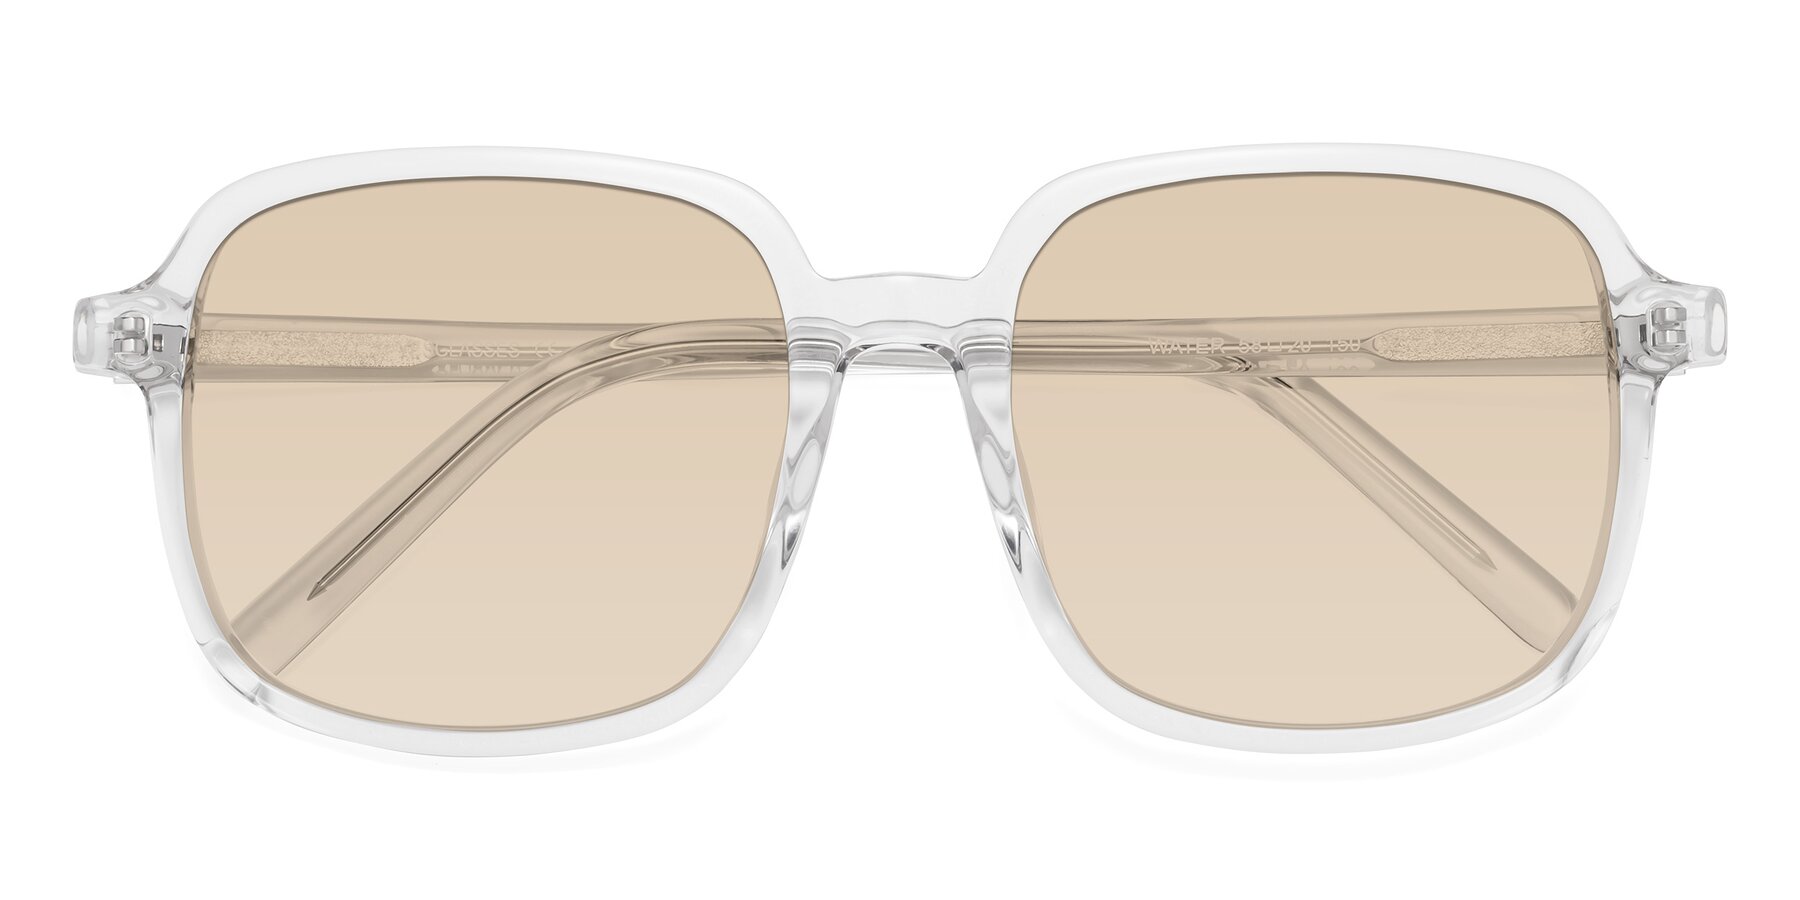 Oakley Frogskins square festival sunglasses with reflective blue lens in  transparent | ASOS